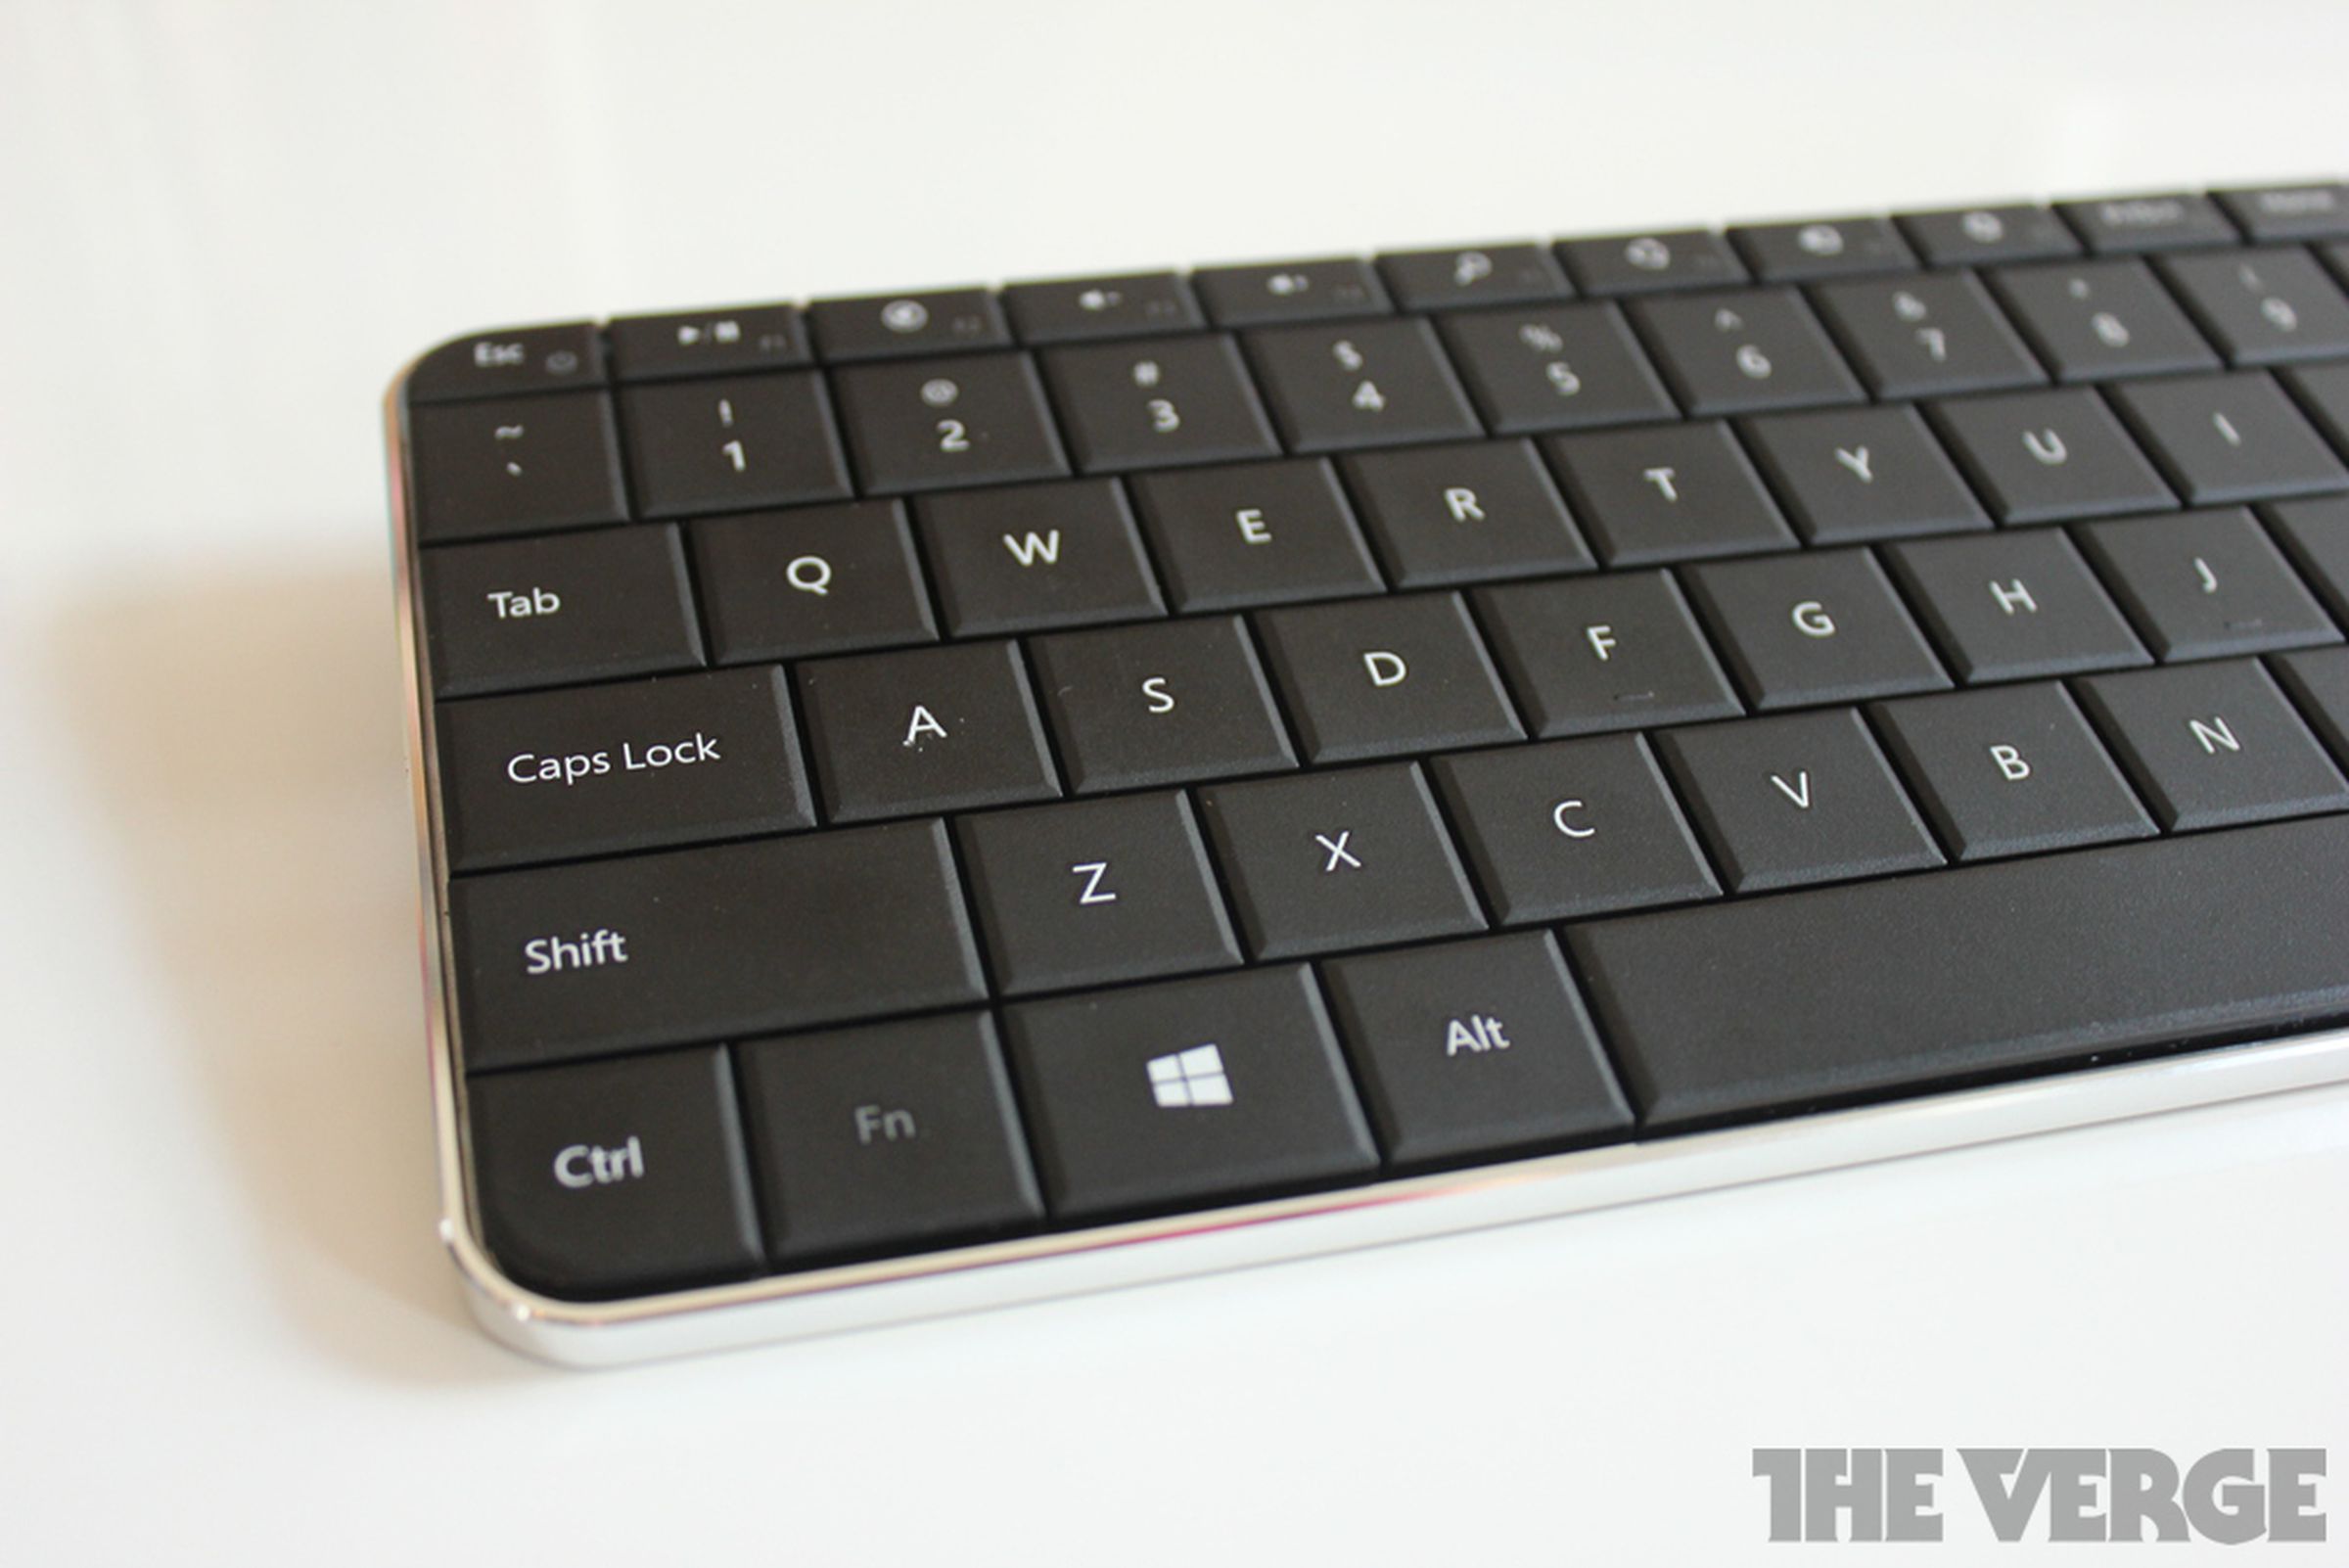 Microsoft Wedge Touch Mouse and Mobile Keyboard